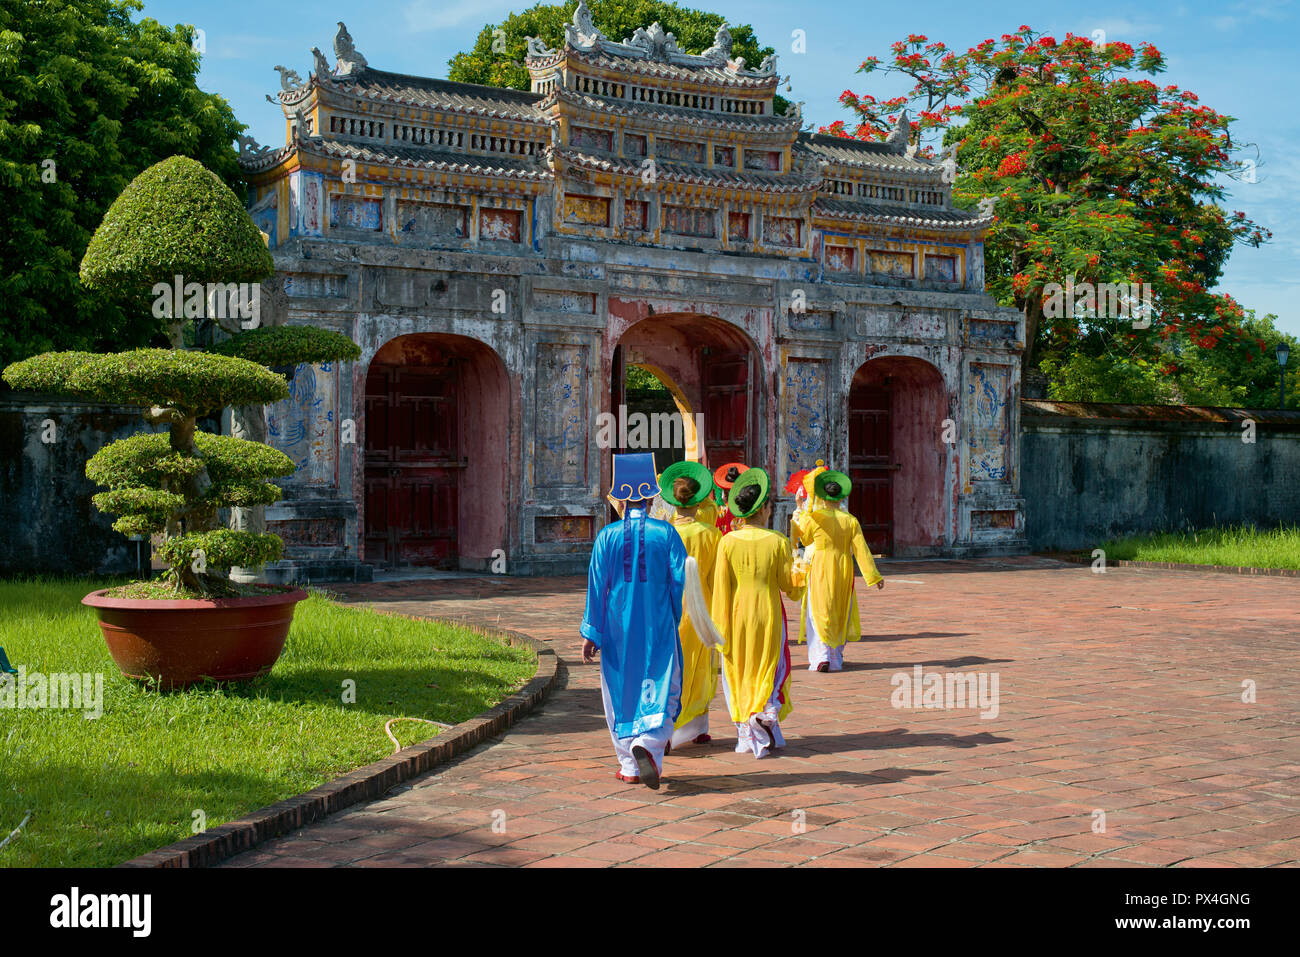 Vietnamese extras walk through West Gate, Chuong Duc, Imperial Palace Hoang Thanh, Hue, Vietnam Stock Photo